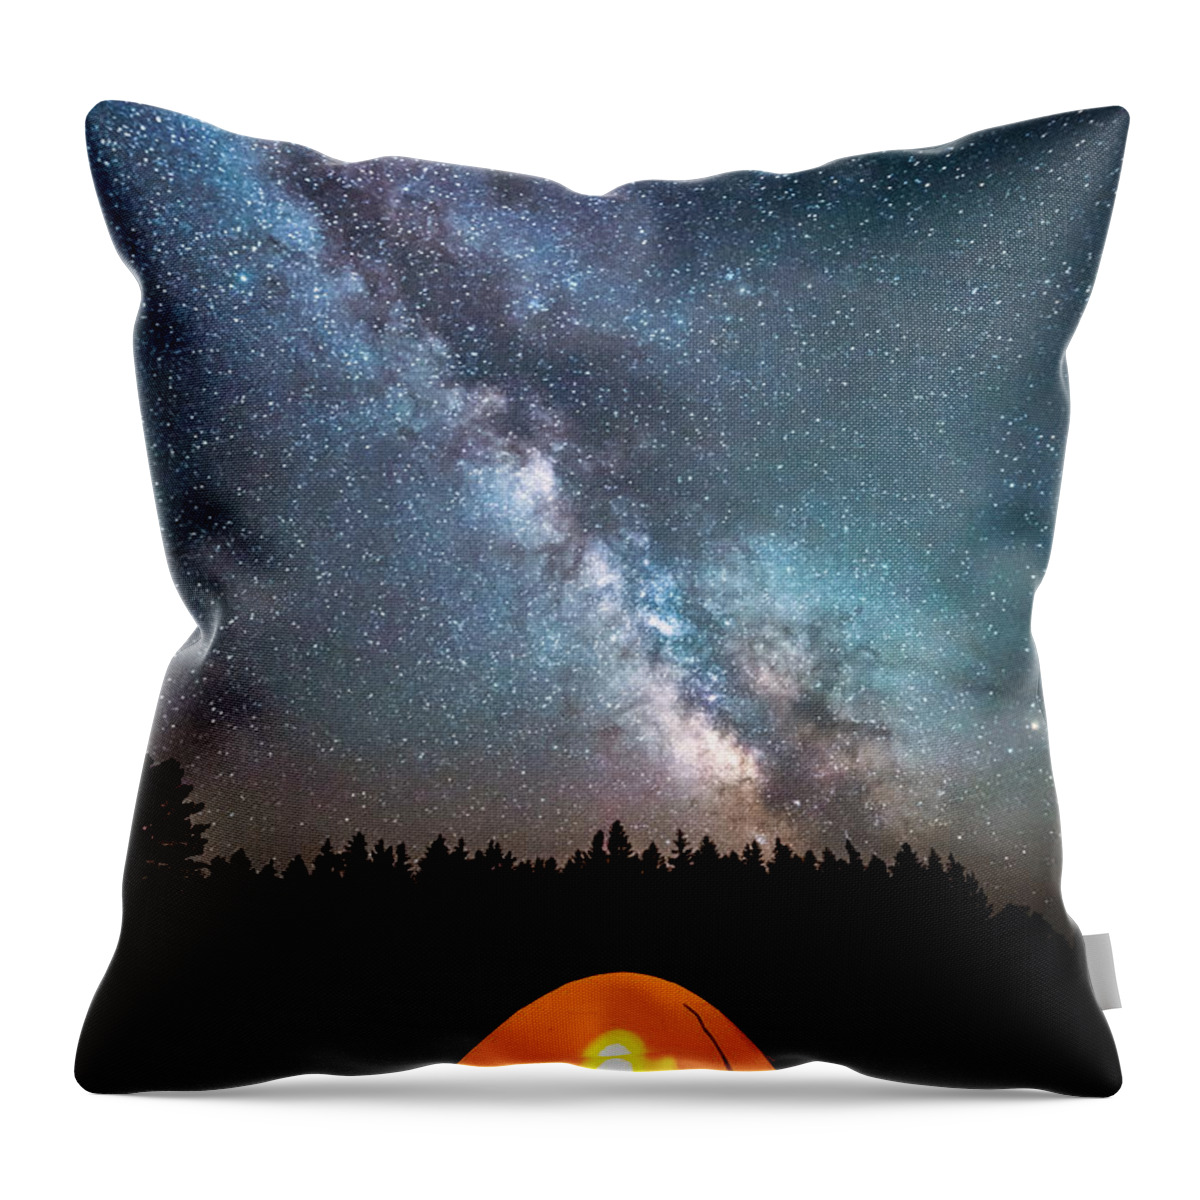 Camping Under The Stars Throw Pillow featuring the photograph Camping Under The Stars by Michael Ver Sprill